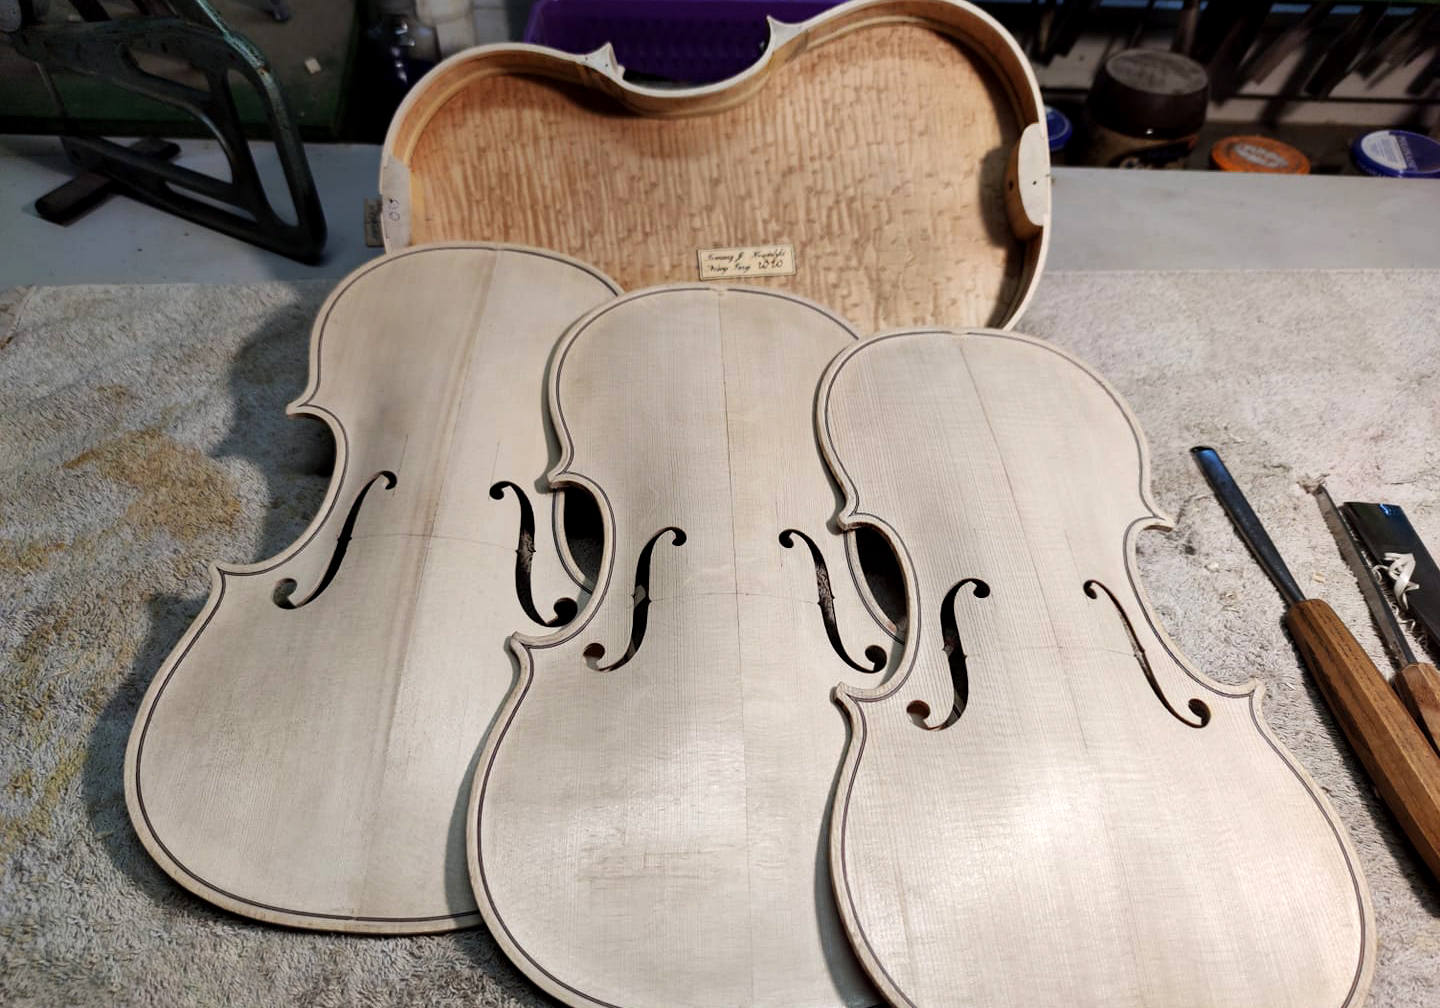 Three unfinished violin front plates on a workbench with carving tools